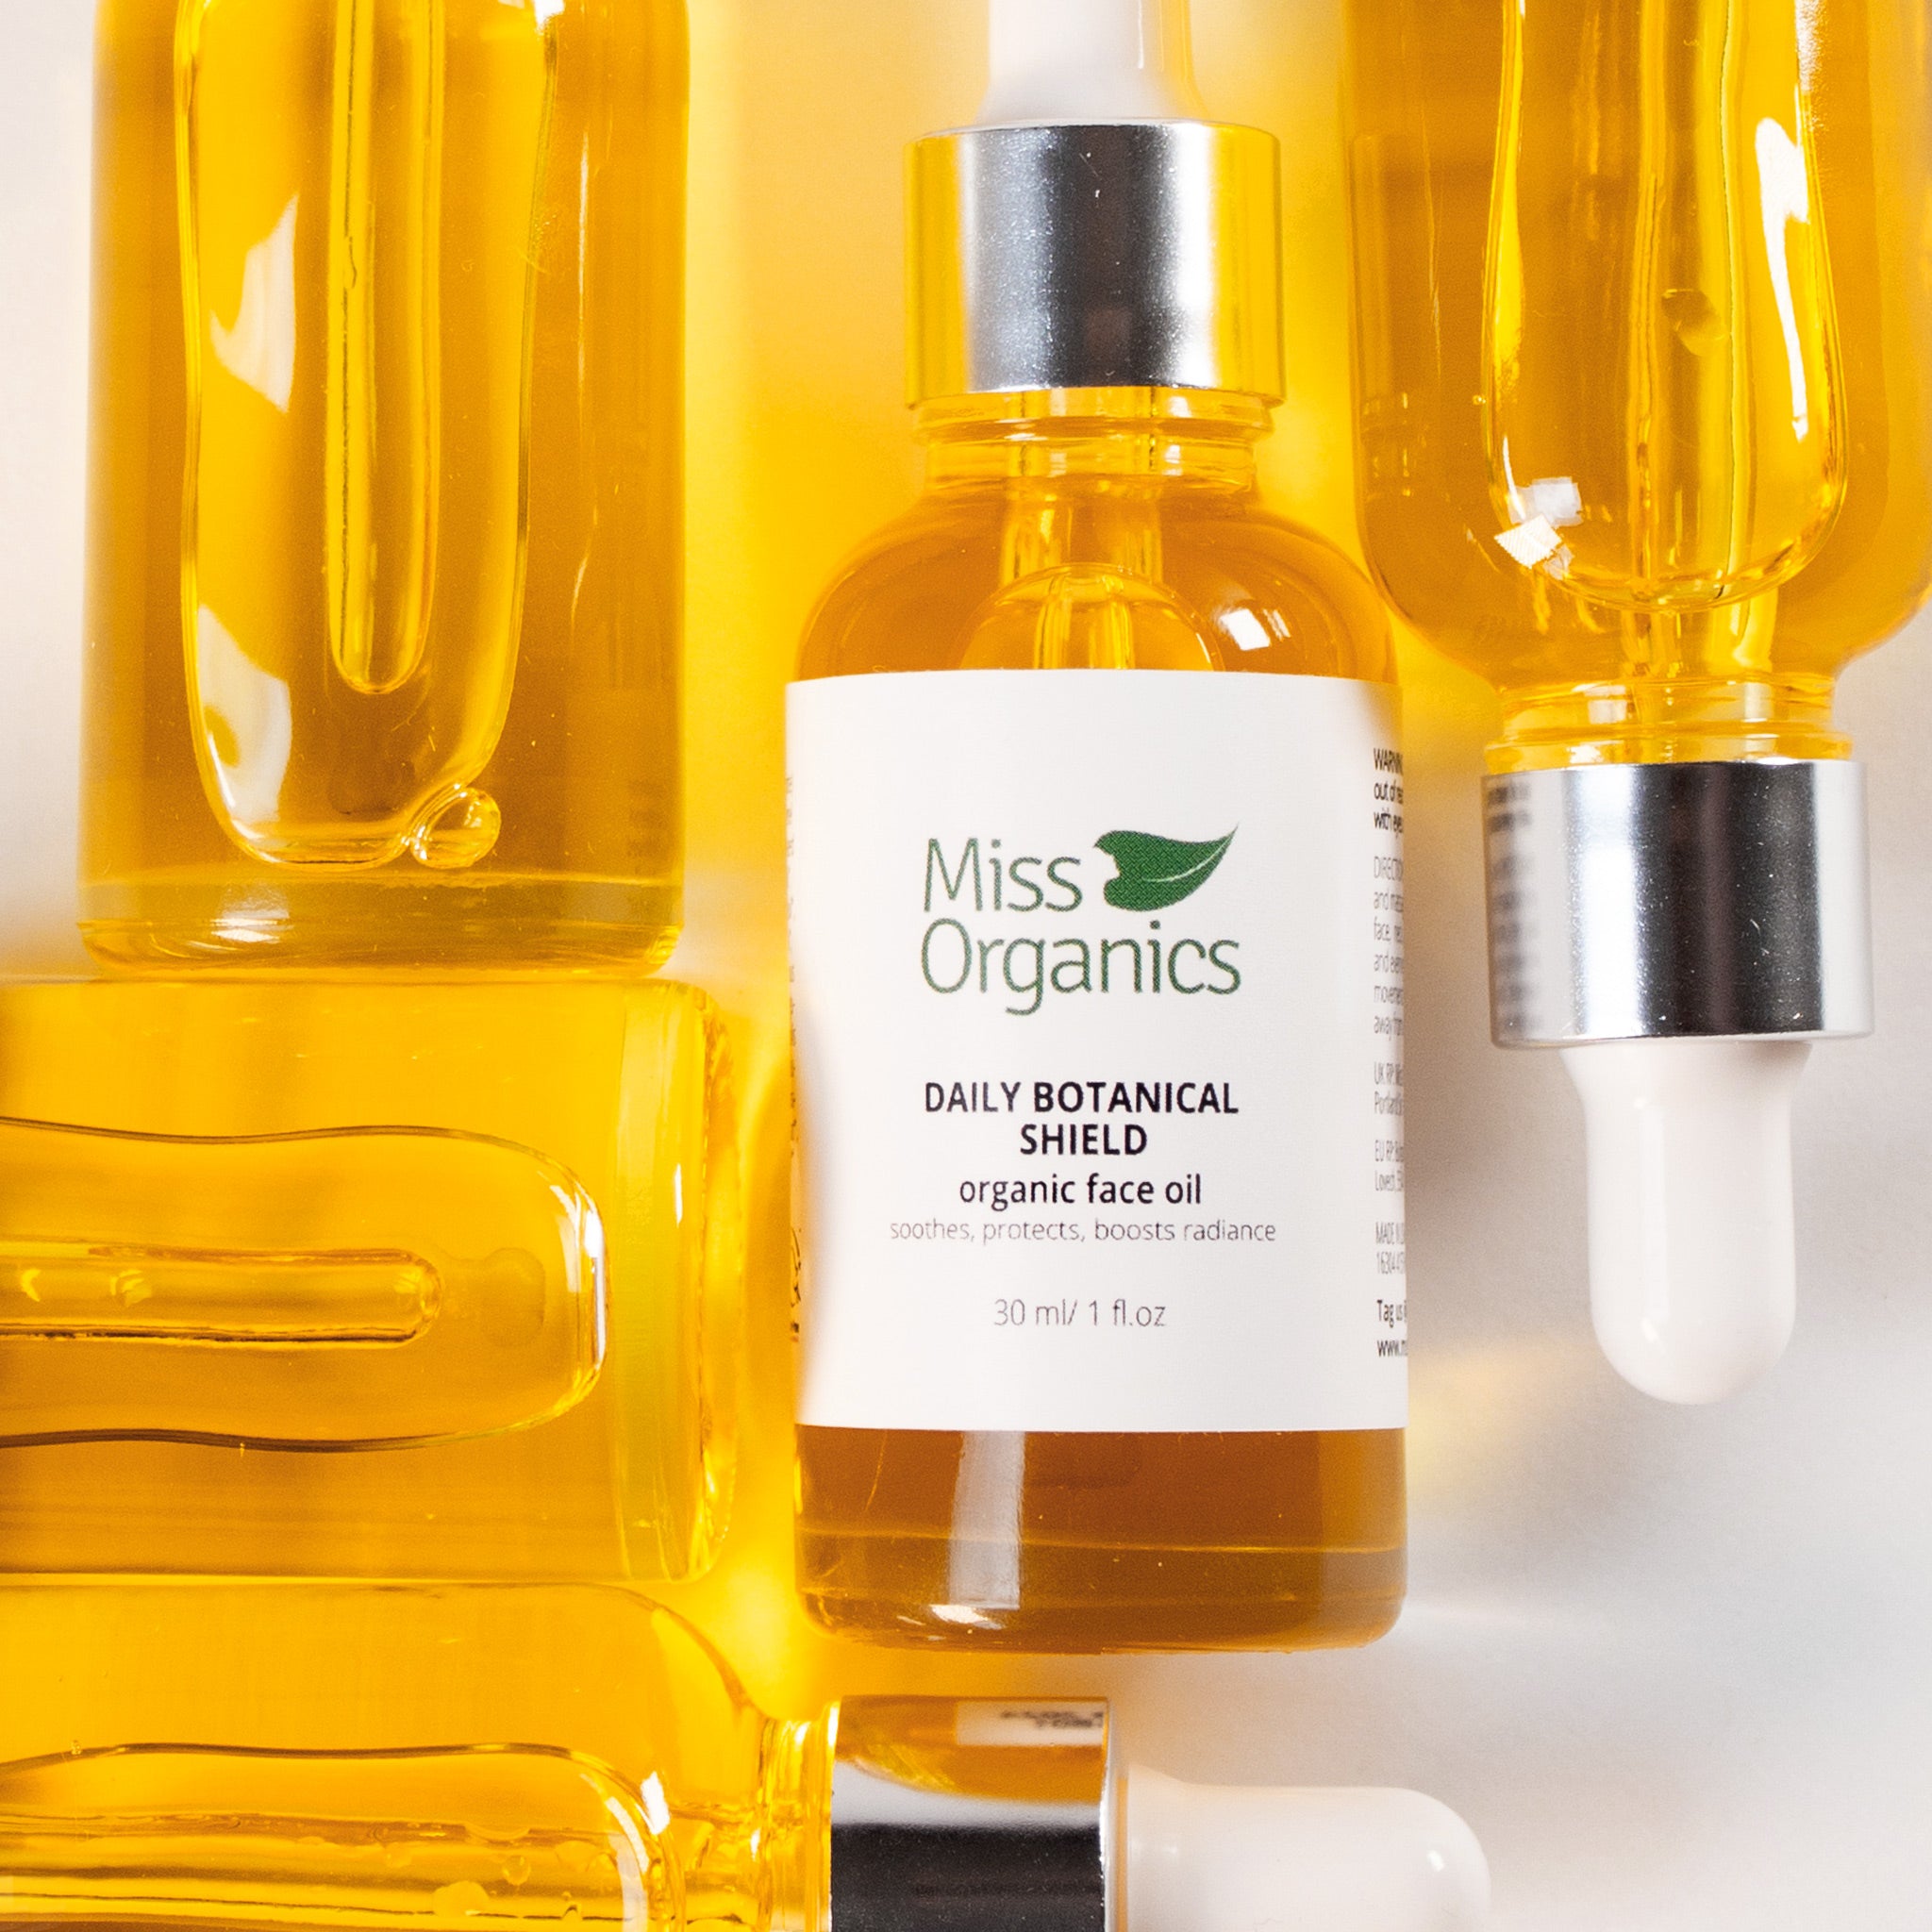 Daily Botanical Shield Organic Face Oil in glass bottle on cream background by Miss Organics